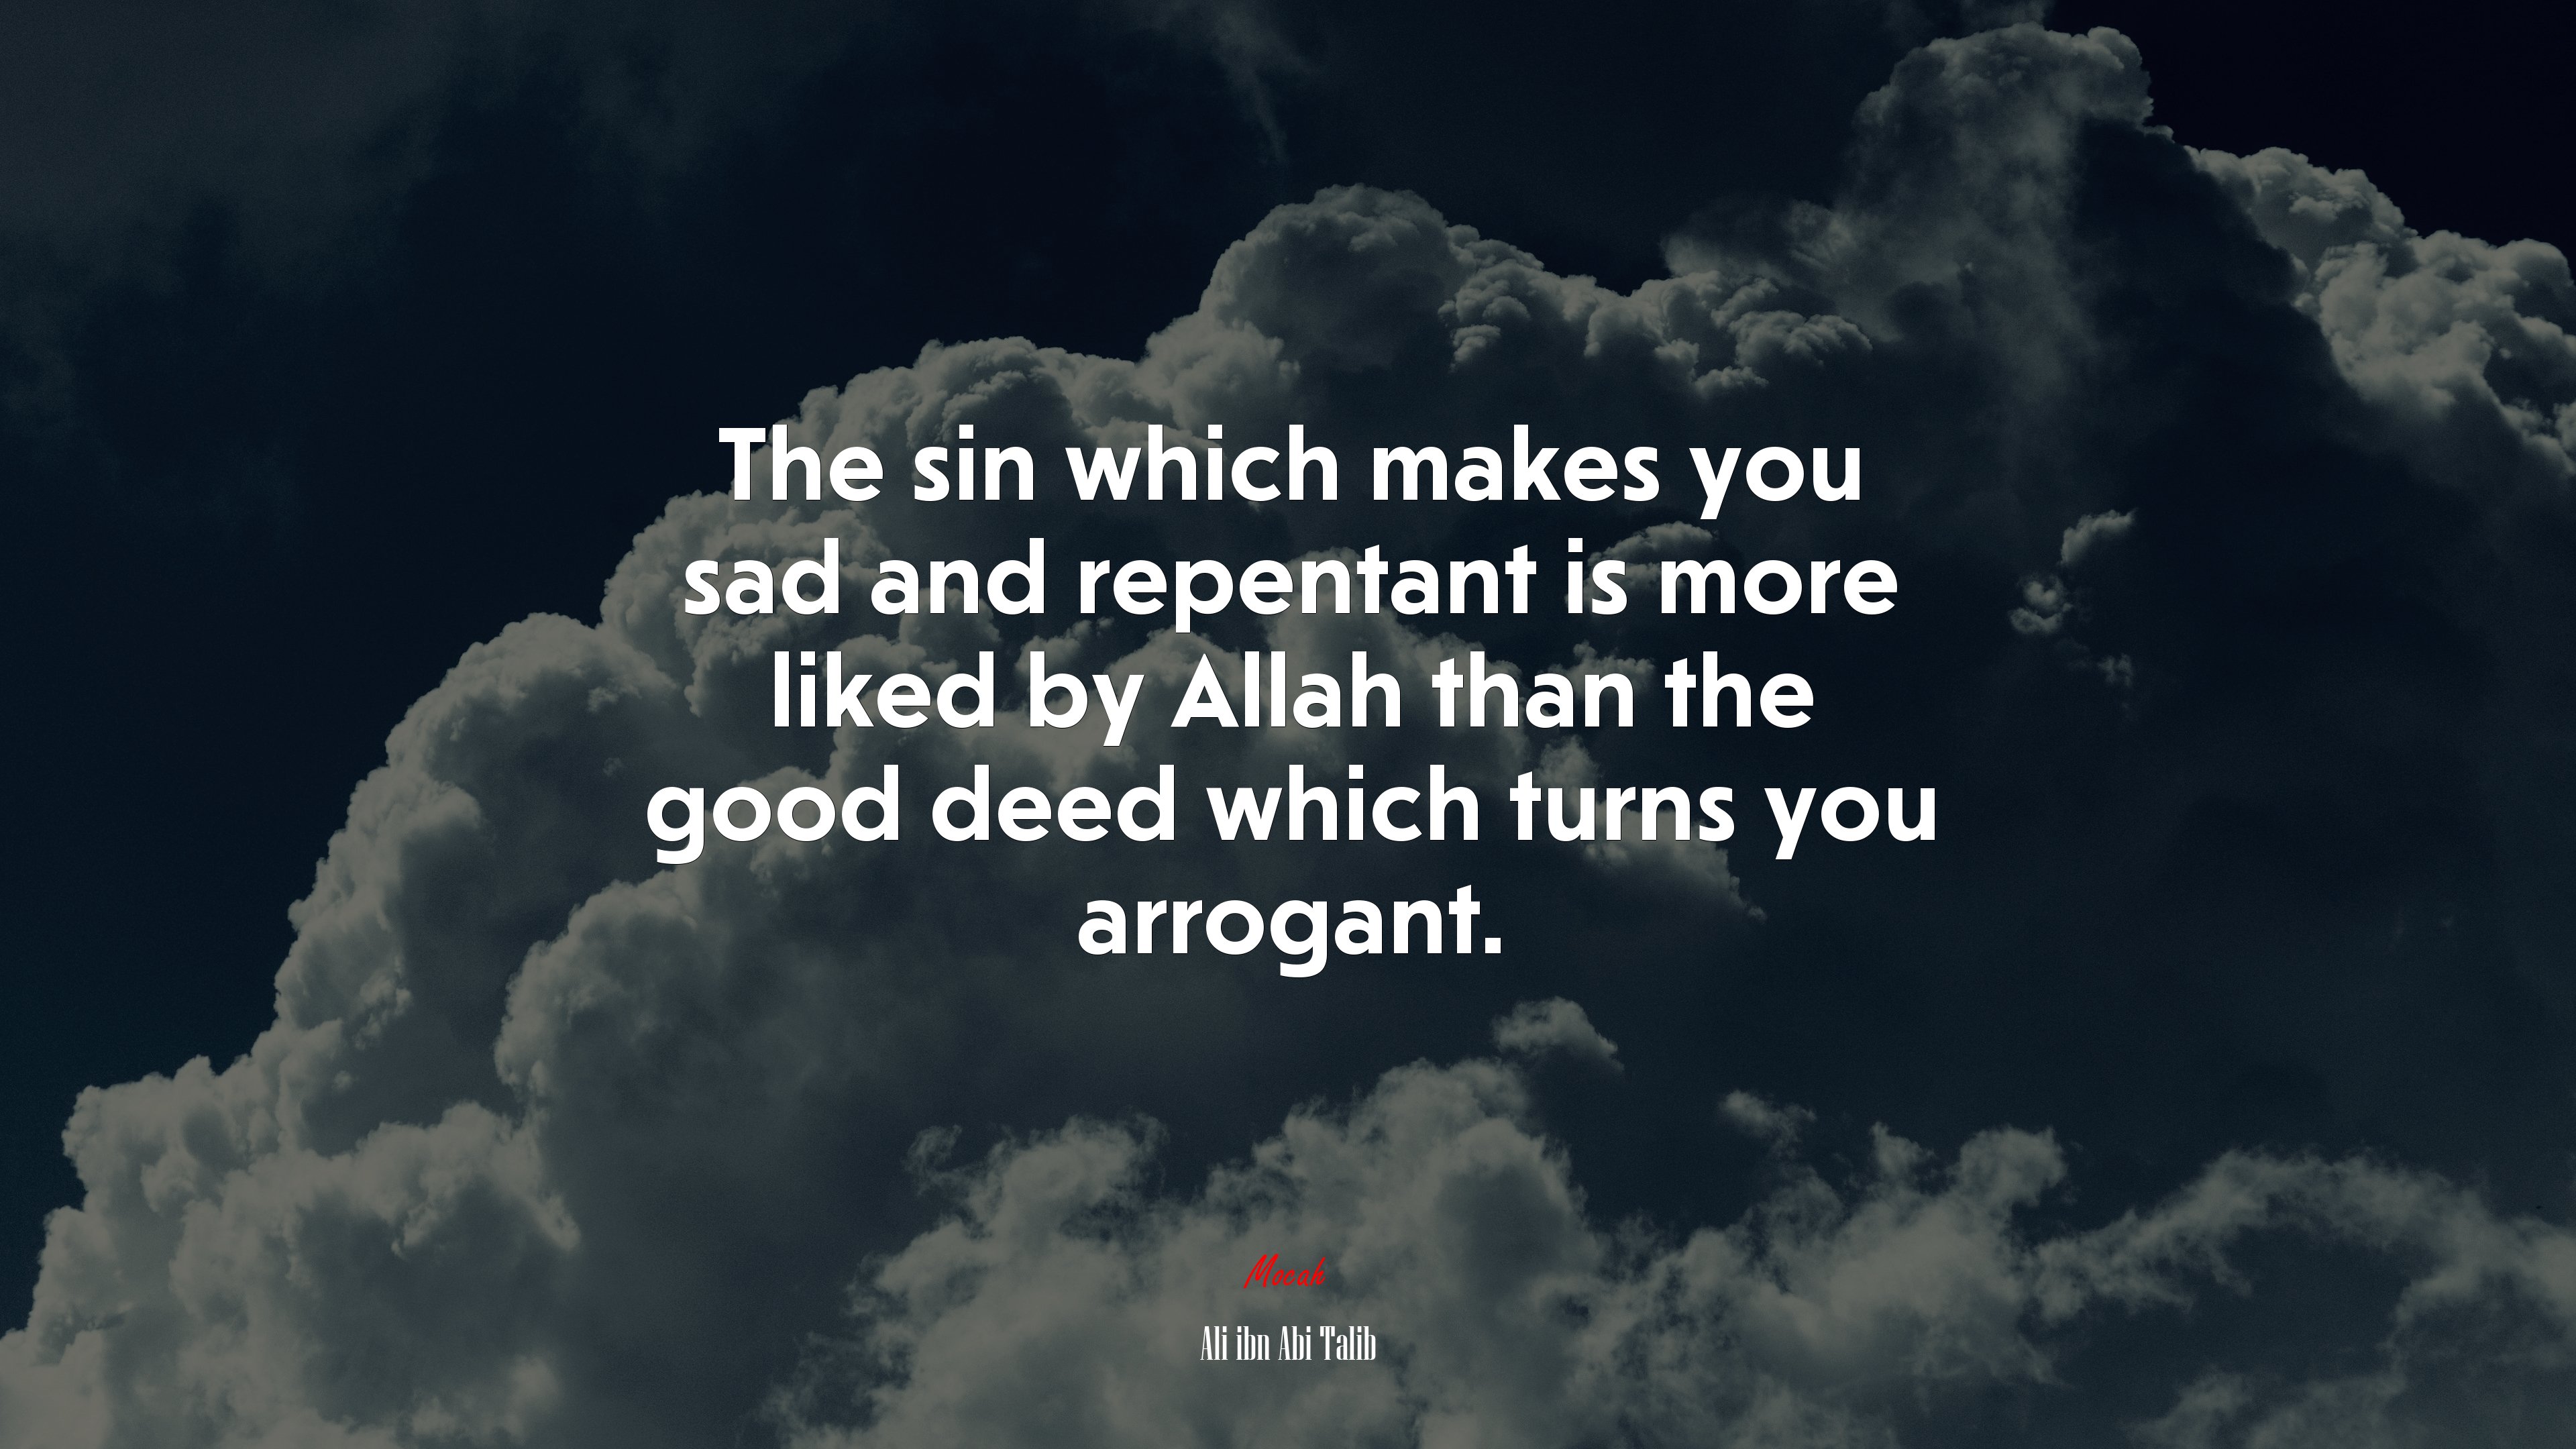 The sin which makes you sad and repentant is more liked by Allah than the good deed which turns you arrogant. Ali ibn Abi Talib quote Gallery HD Wallpaper